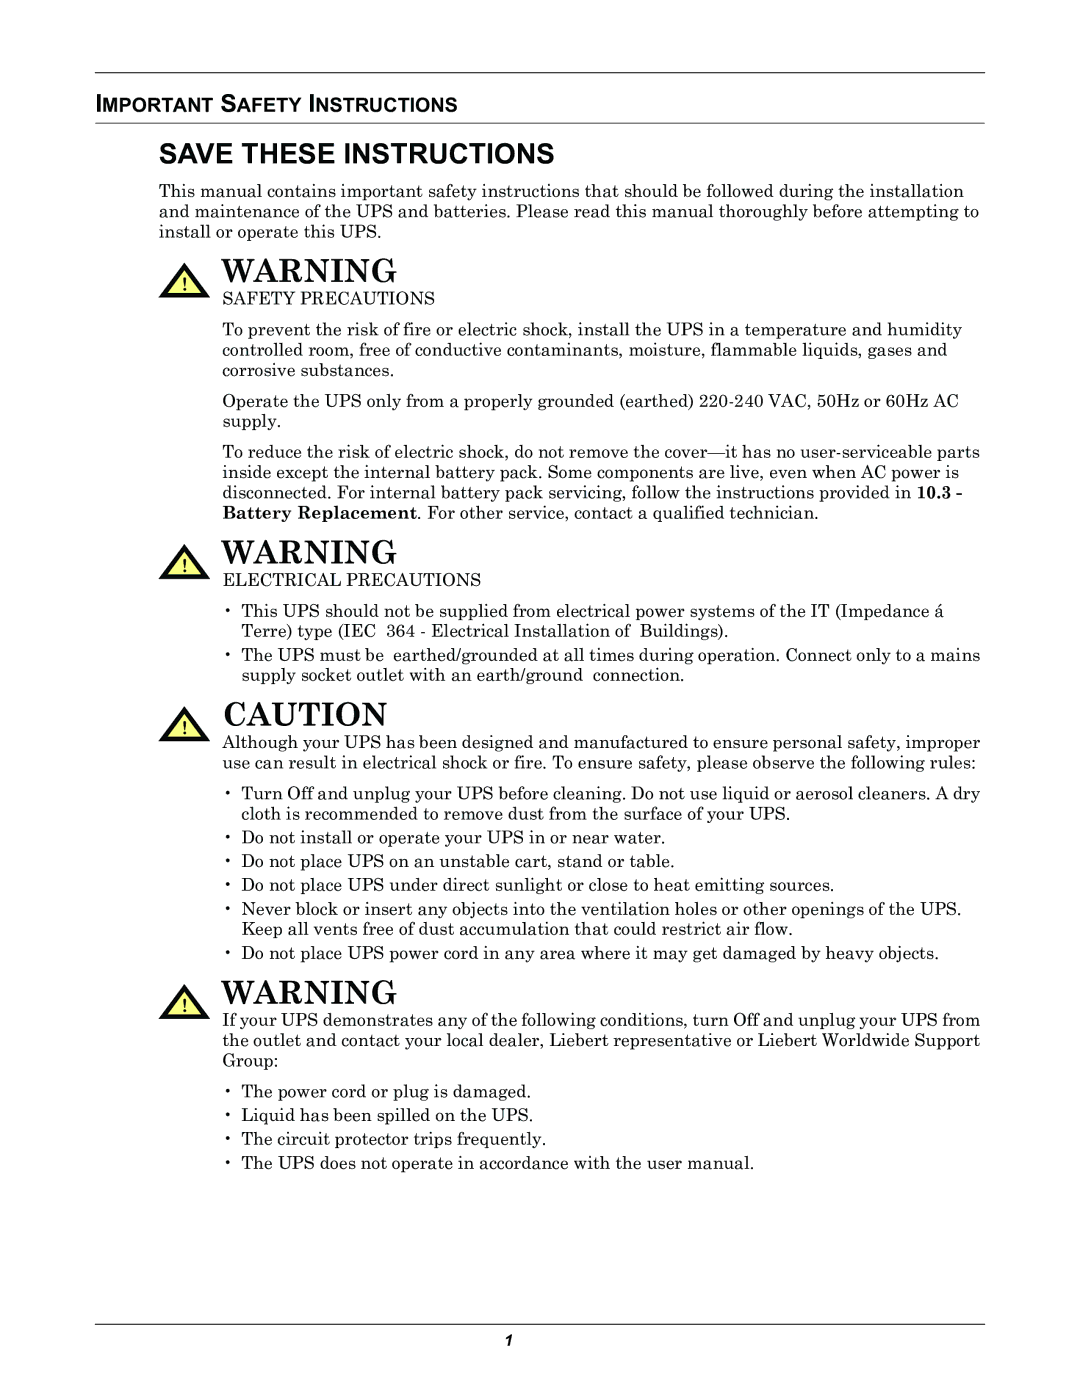 Liebert PSITM user manual Important Safety Instructions, Safety Precautions 